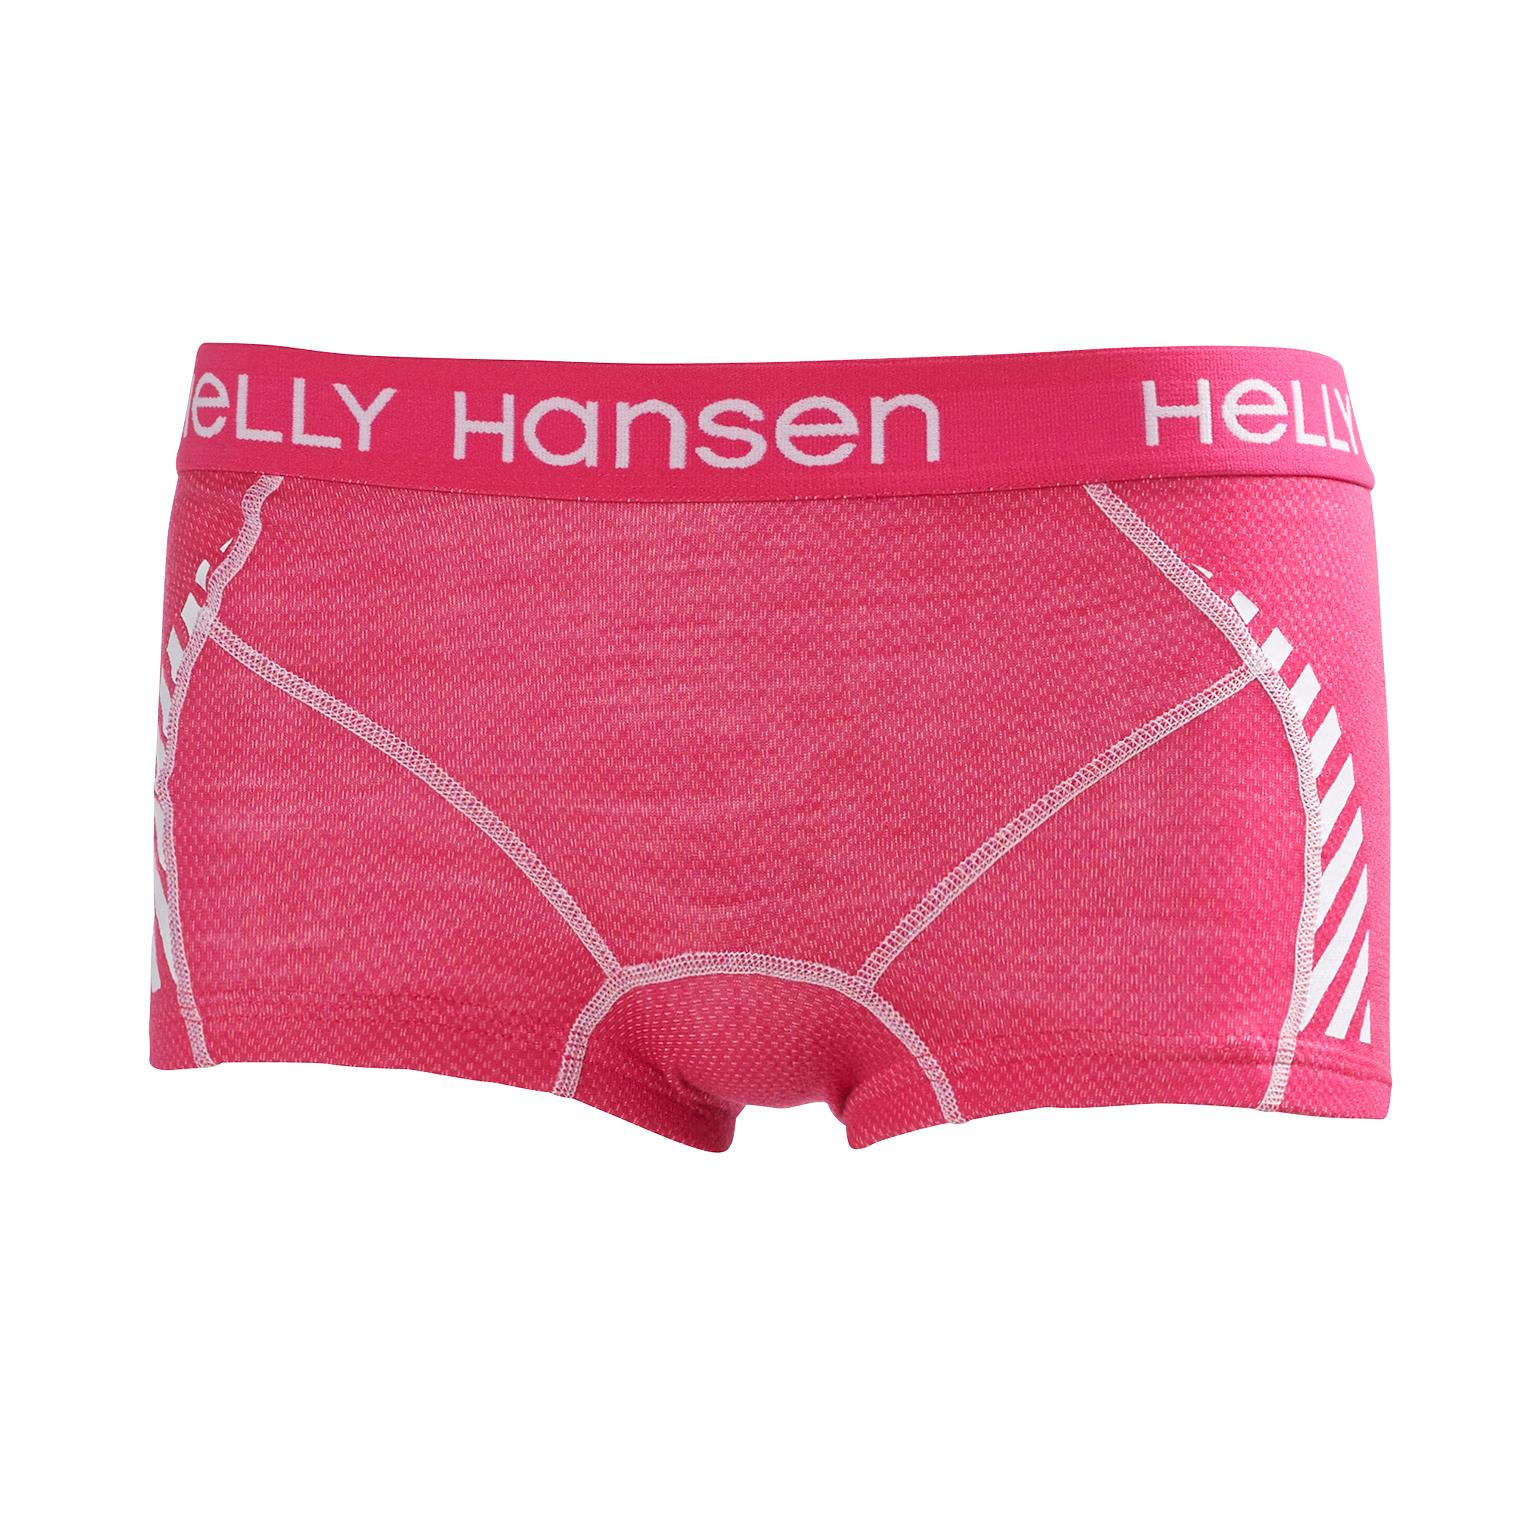 Buy Helly Hansen Boxer from Outnorth